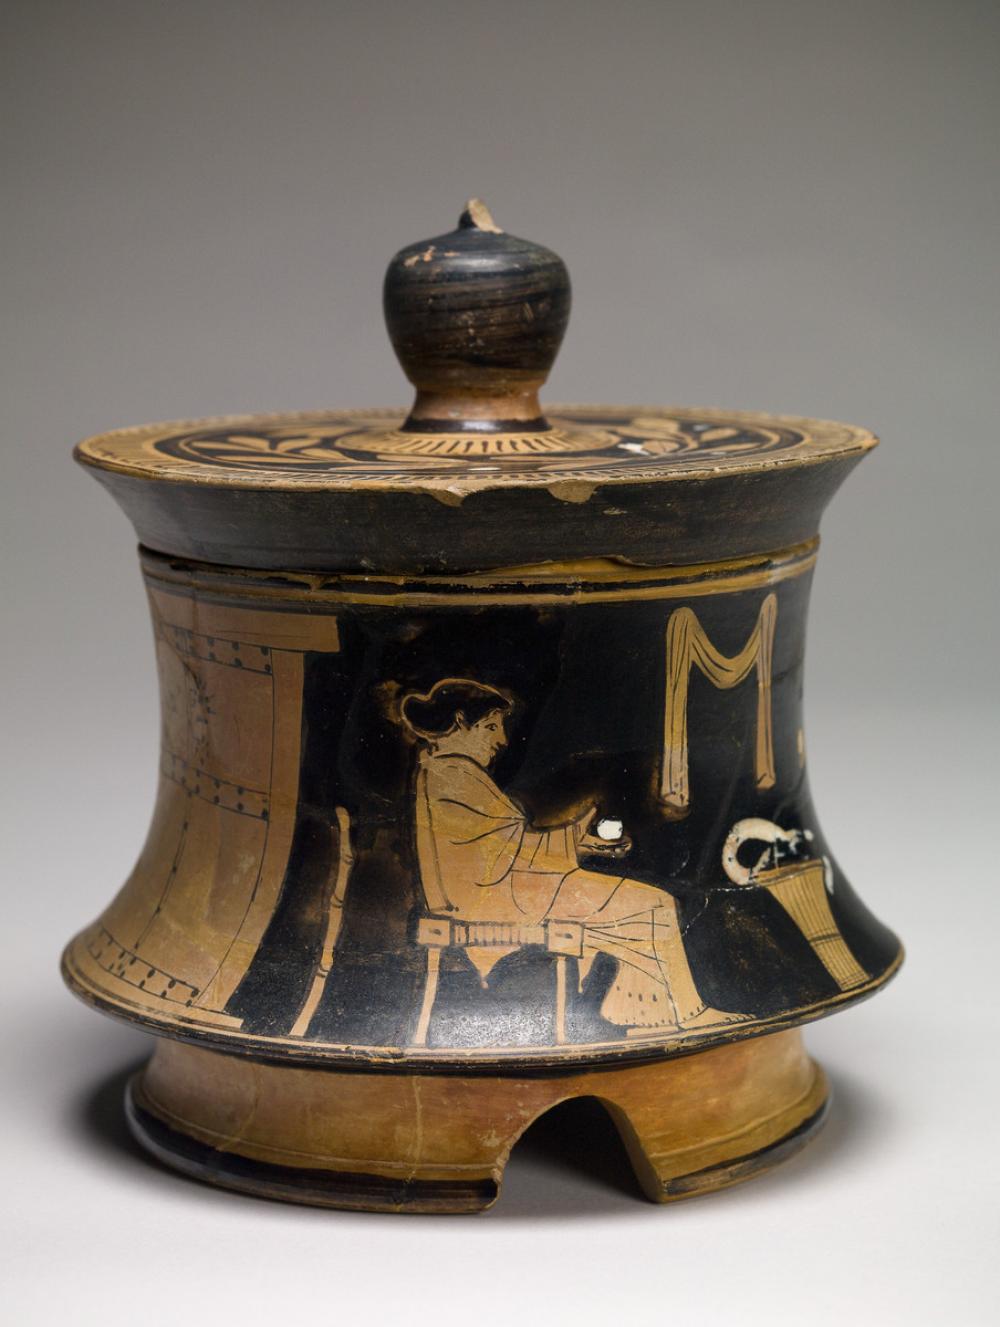 Veii Painter, Tripod pyxis, with a domestic scene